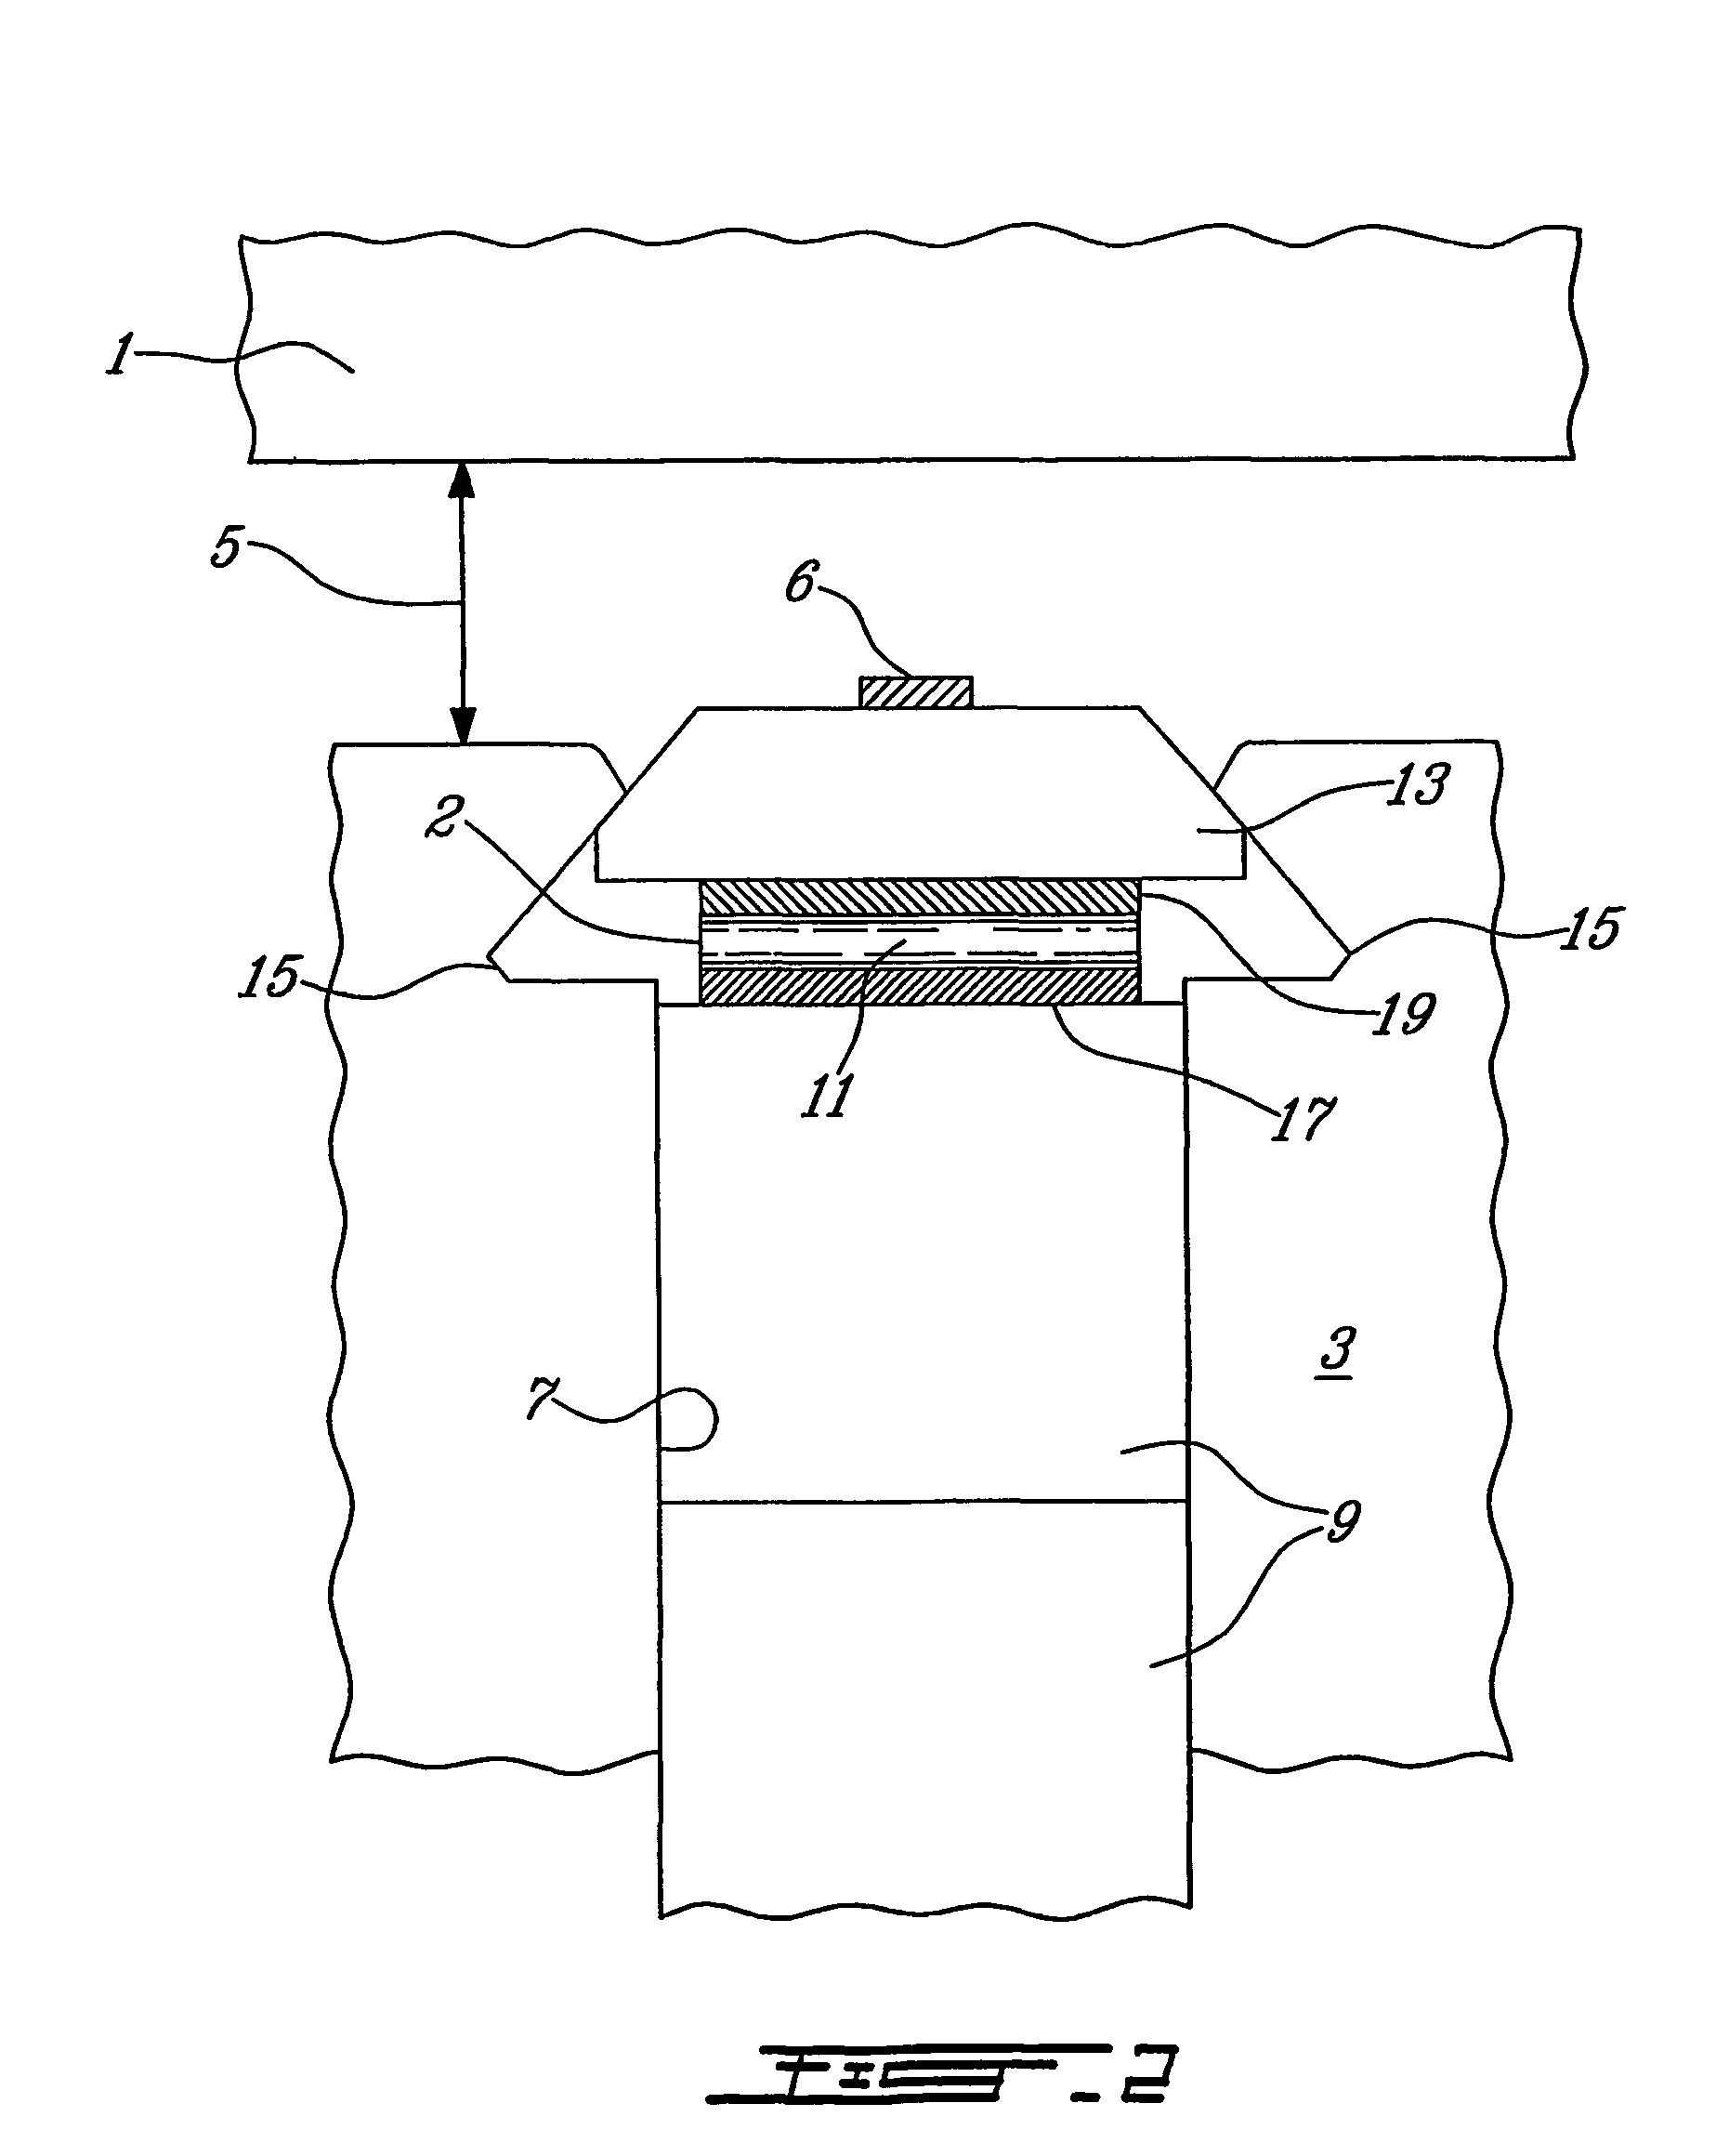 Non intrusive and dynamic method for measuring a distance or the variation thereof through dielectrics